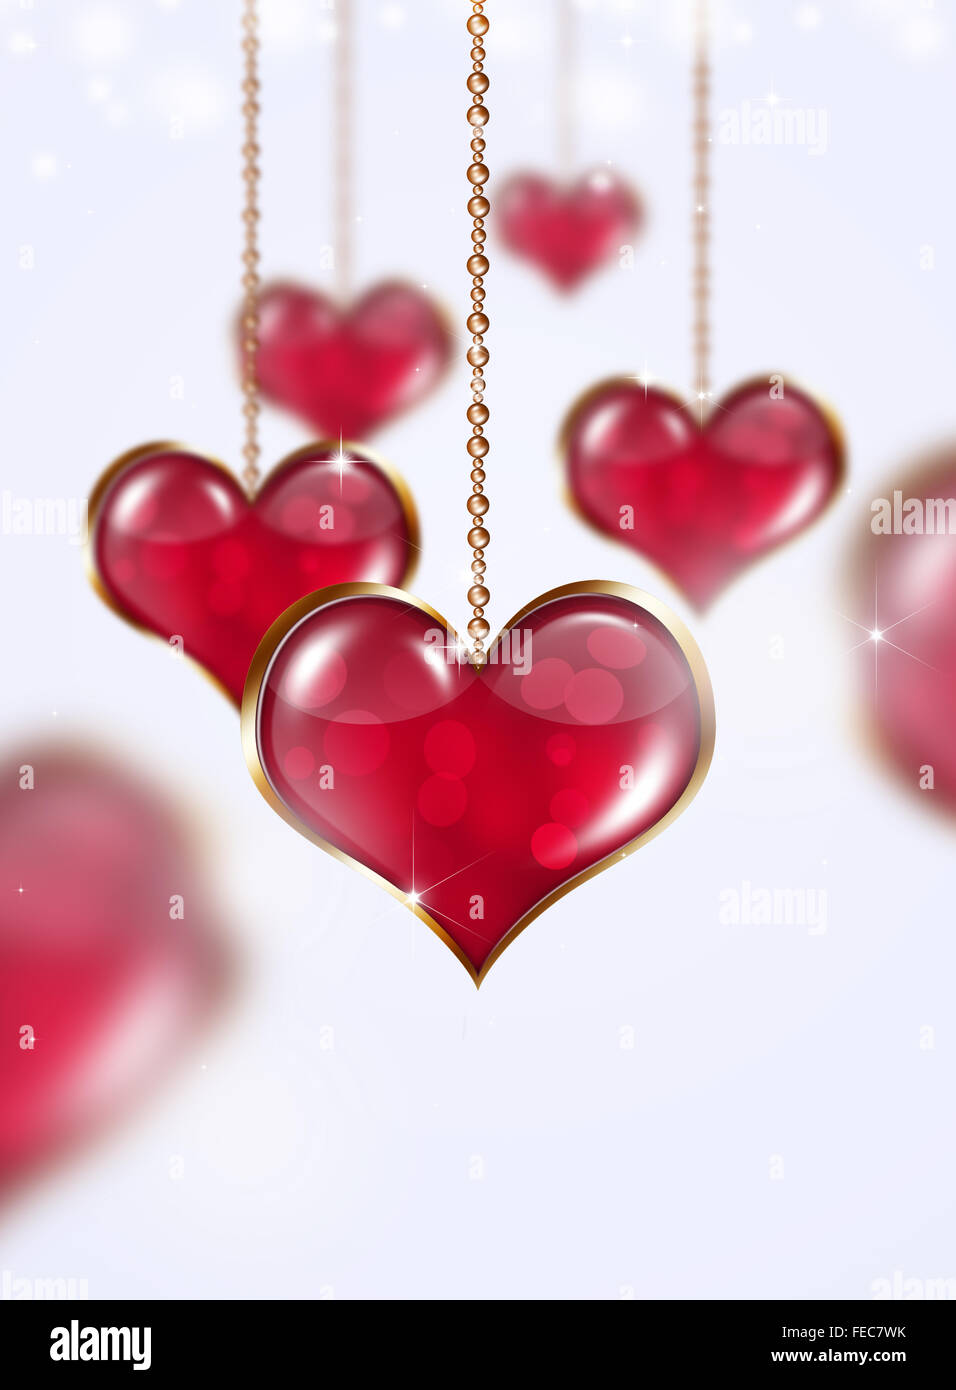 valentine golden hearts on bright background with stars and blurry lights Stock Photo